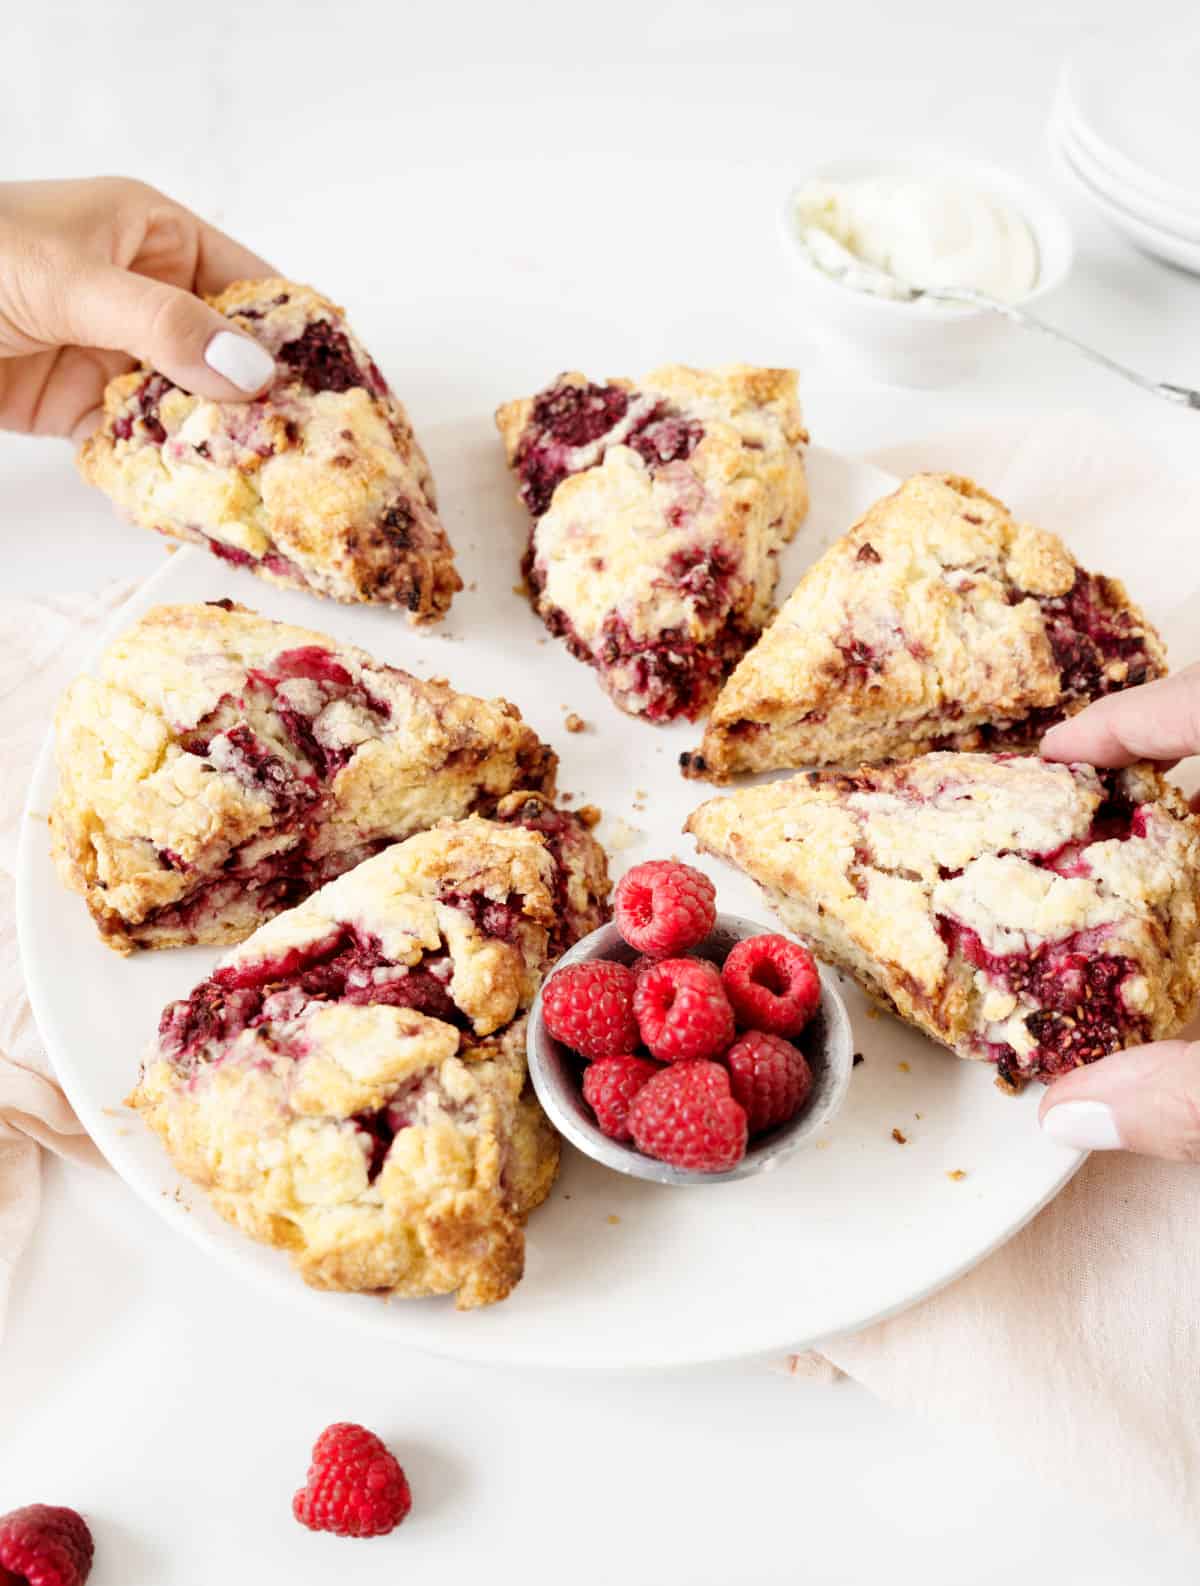 Hands lifting two raspberry lemon scones from a white plate. Pink white surface.